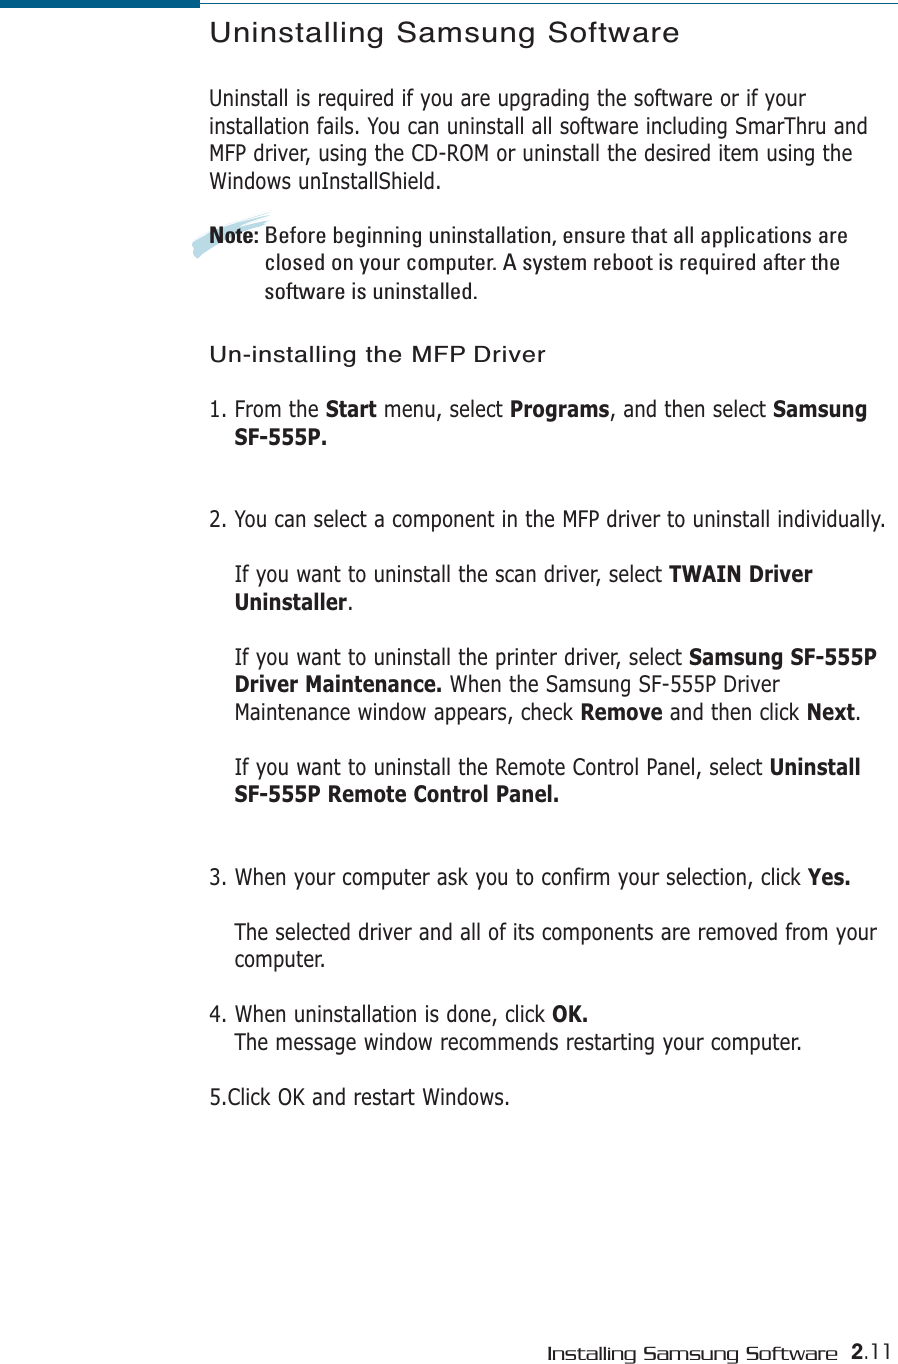 2.11Installing Samsung SoftwareUninstalling Samsung SoftwareUninstall is required if you are upgrading the software or if yourinstallation fails. You can uninstall all software including SmarThru andMFP driver, using the CD-ROM or uninstall the desired item using theWindows unInstallShield.Note: Before beginning uninstallation, ensure that all applications areclosed on your computer. A system reboot is required after thesoftware is uninstalled.Un-installing the MFP Driver1. From the Start menu, select Programs, and then select SamsungSF-555P.2. You can select a component in the MFP driver to uninstall individually.If you want to uninstall the scan driver, select TWAIN DriverUninstaller. If you want to uninstall the printer driver, select Samsung SF-555PDriver Maintenance. When the Samsung SF-555P DriverMaintenance window appears, check Remove and then click Next.If you want to uninstall the Remote Control Panel, select UninstallSF-555P Remote Control Panel.3. When your computer ask you to confirm your selection, click Yes.The selected driver and all of its components are removed from yourcomputer. 4. When uninstallation is done, click OK. The message window recommends restarting your computer.5.Click OK and restart Windows.